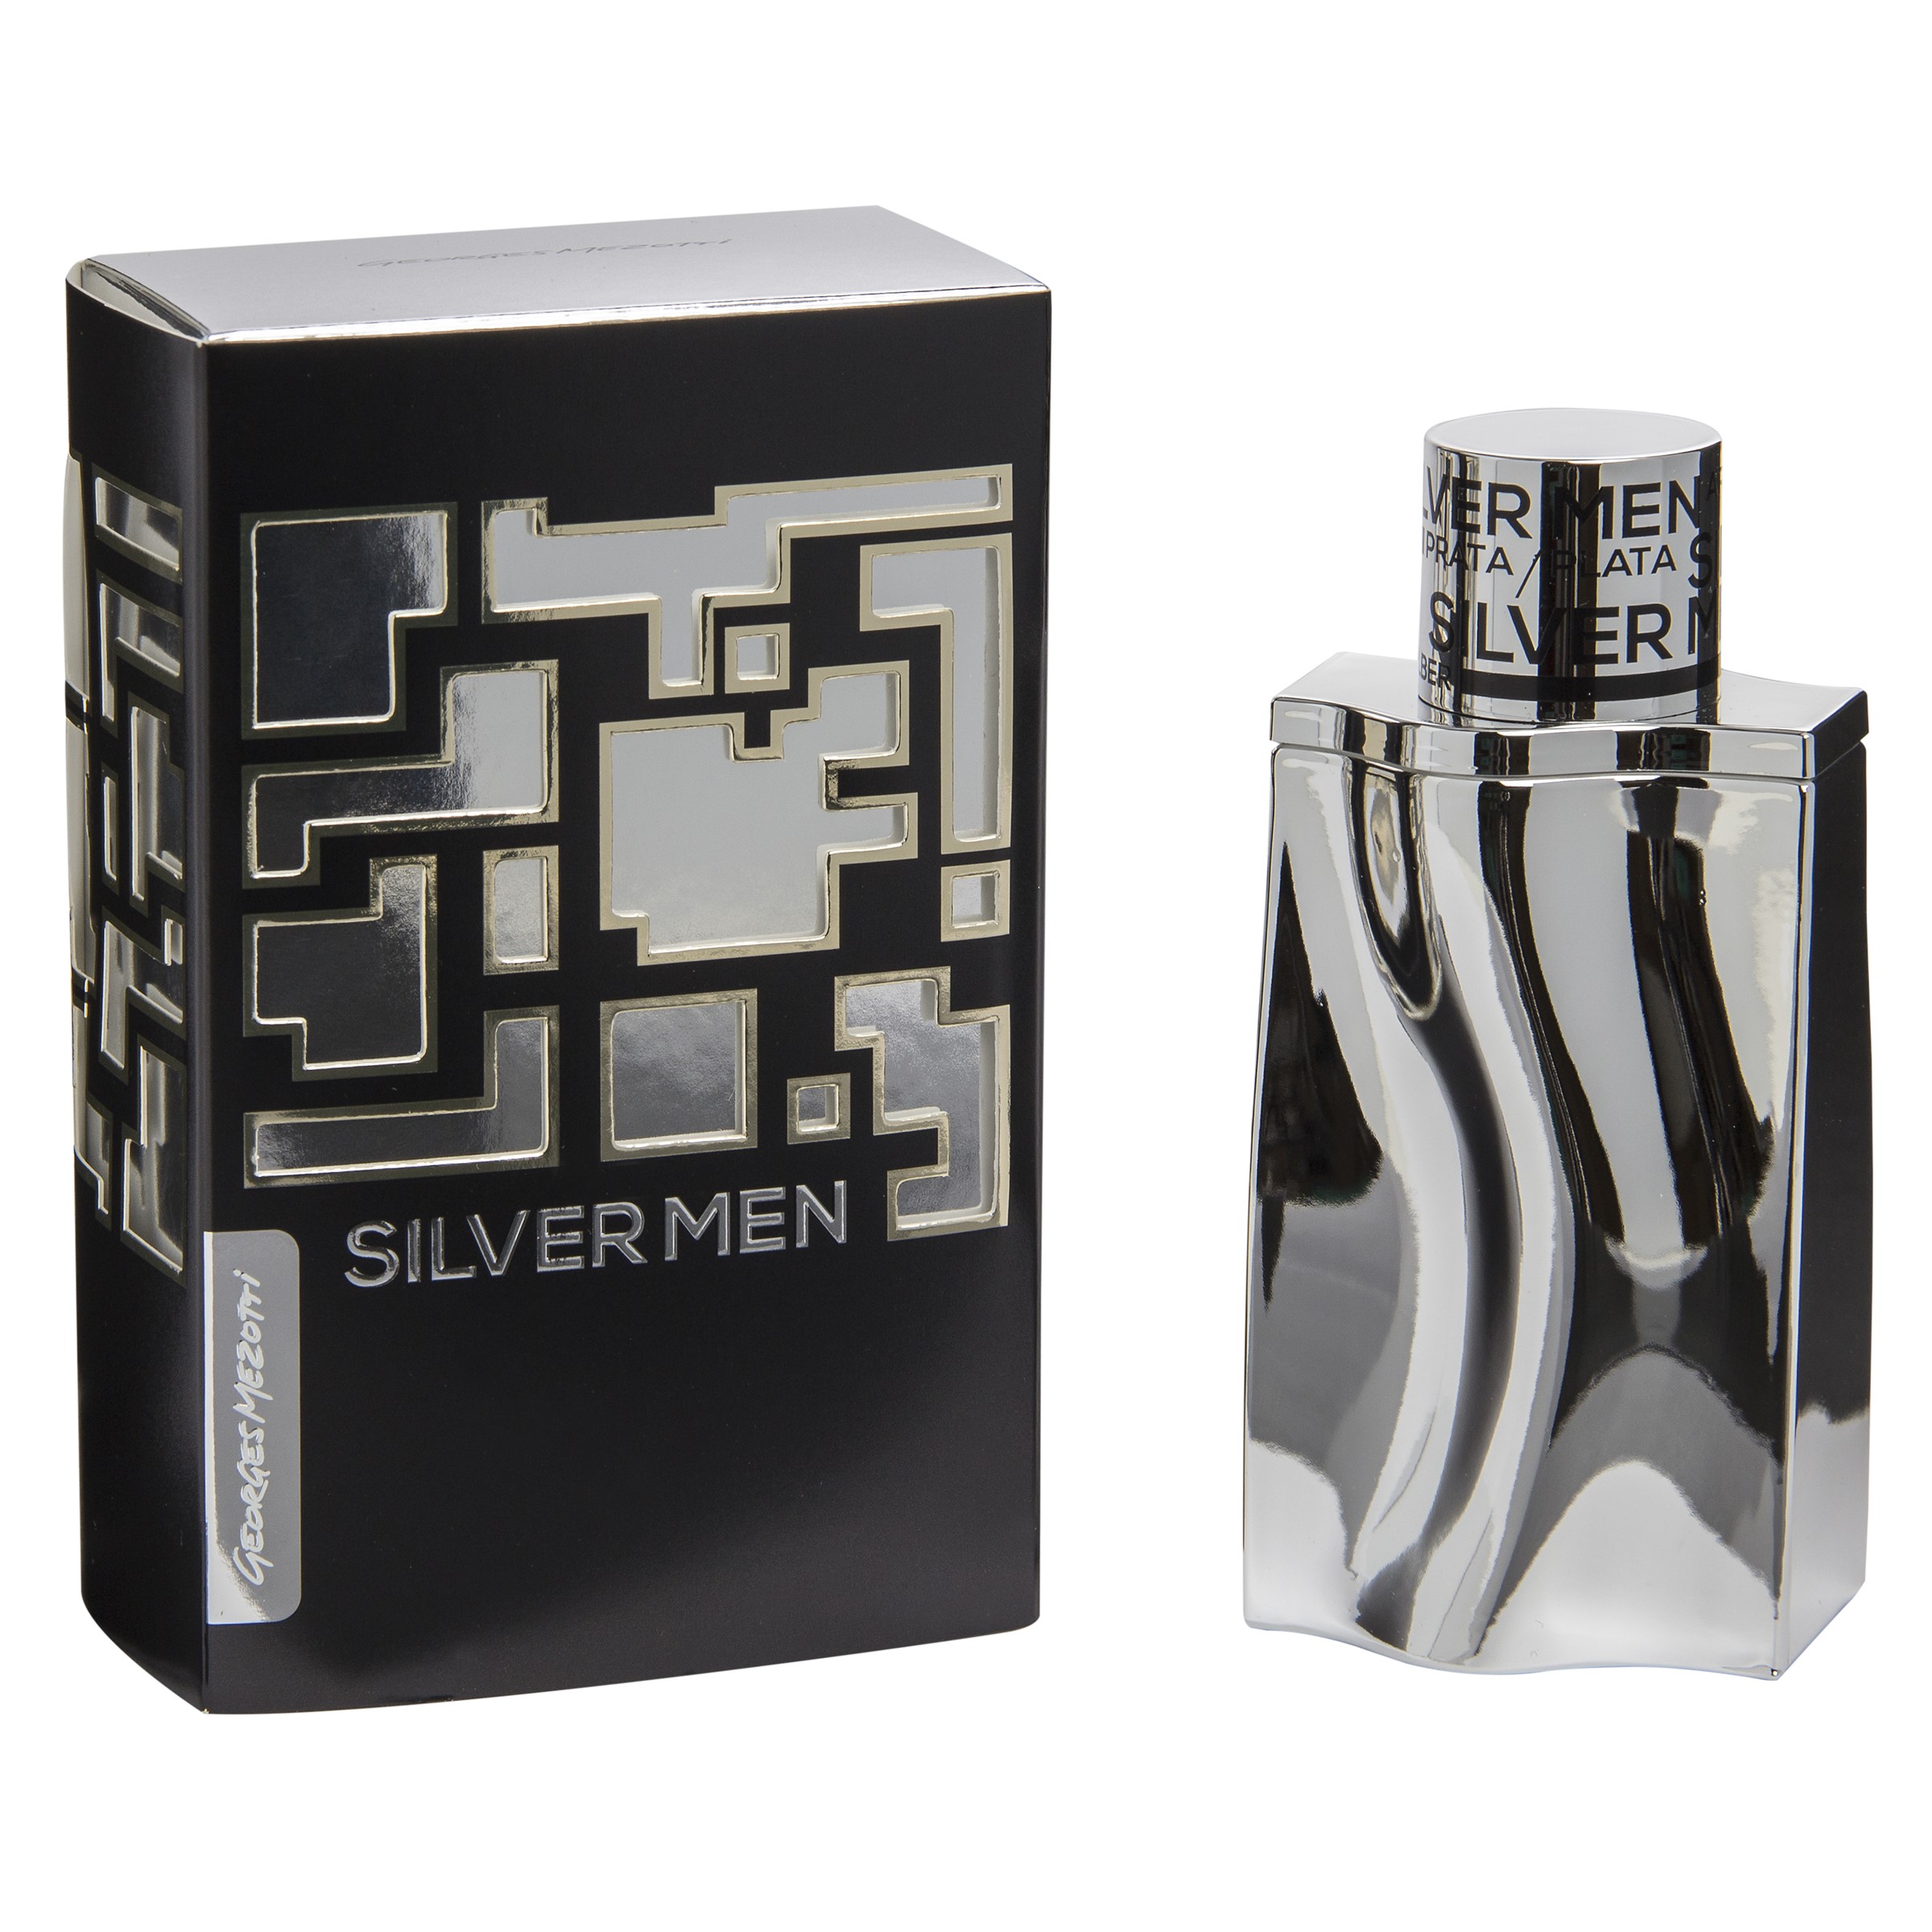 Featured image for “Silver Men”